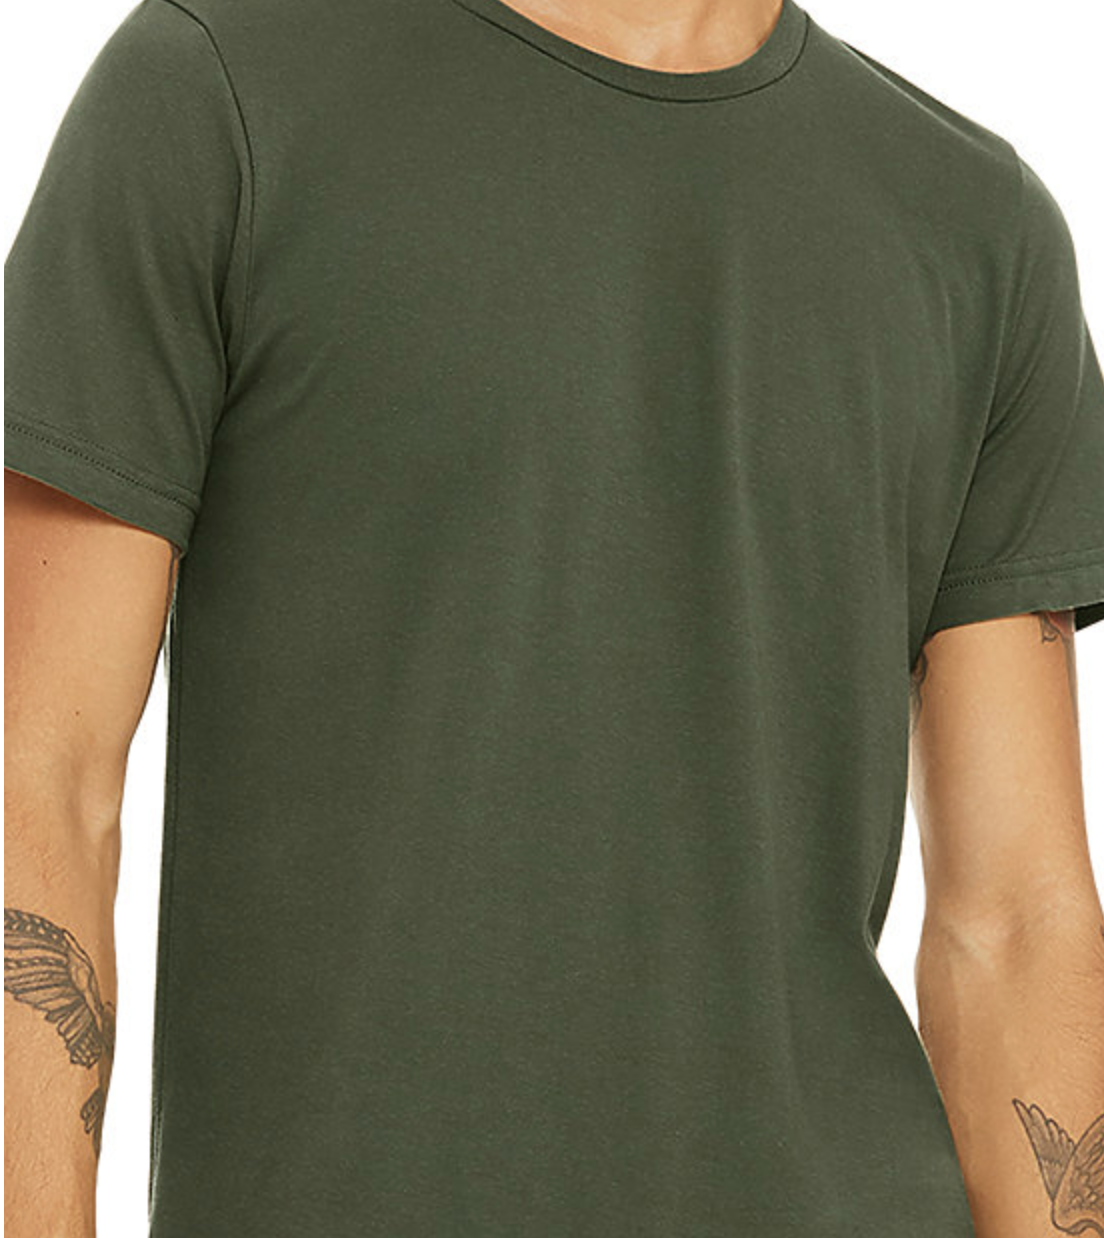 Can someone help me to find an olive drab green t-shirt? | T-Shirt Forums